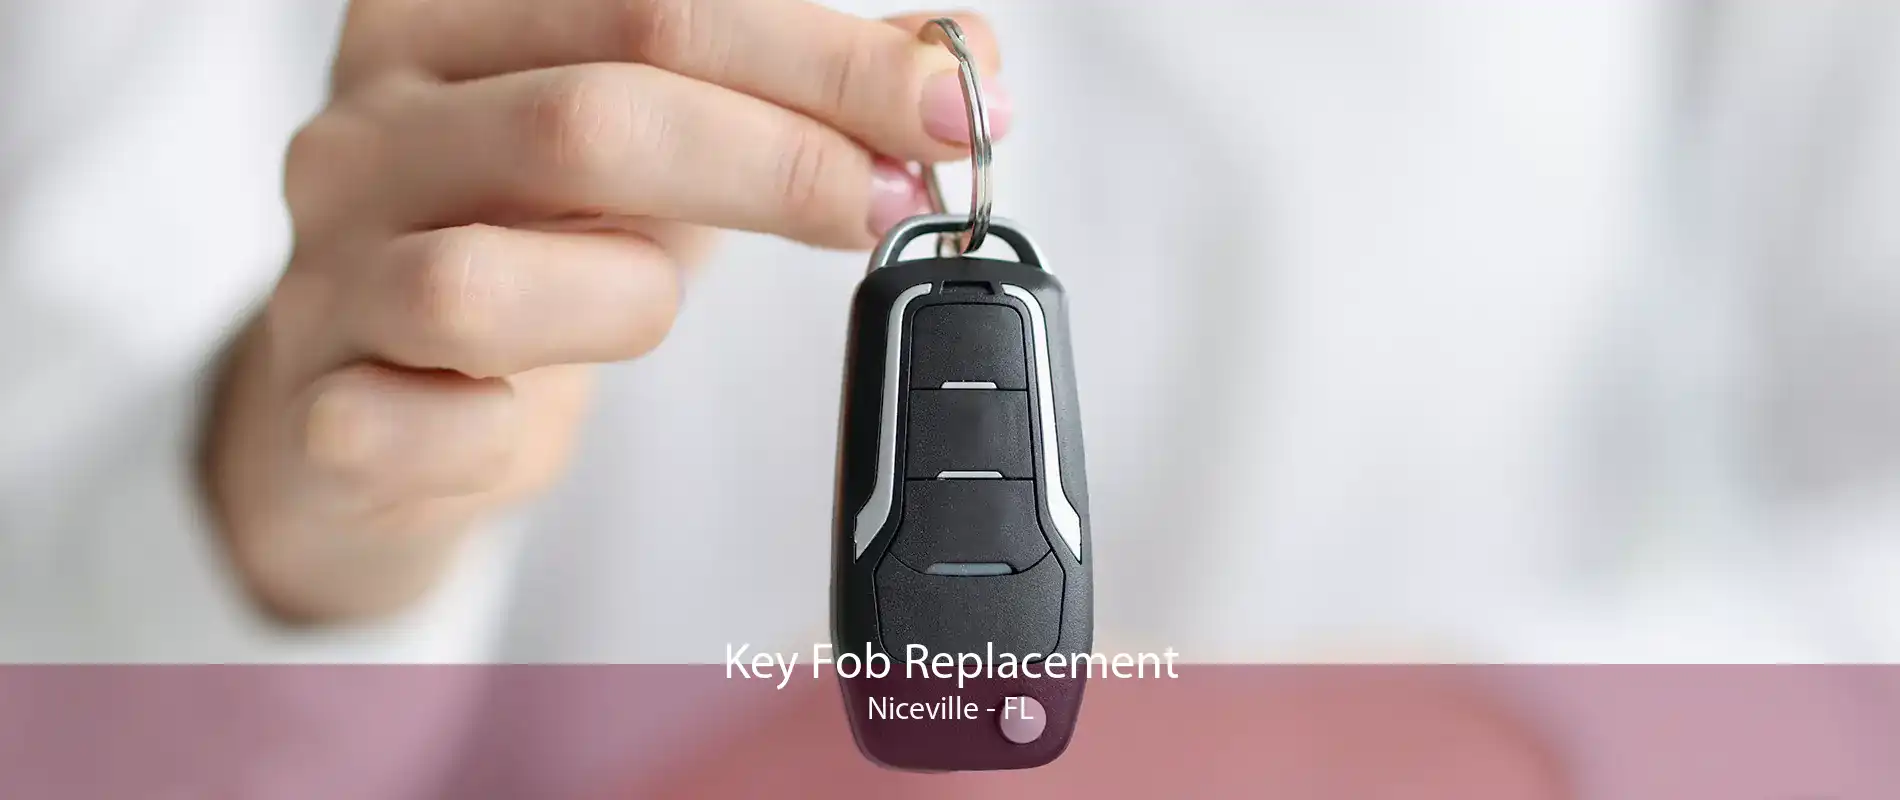 Key Fob Replacement Niceville - FL